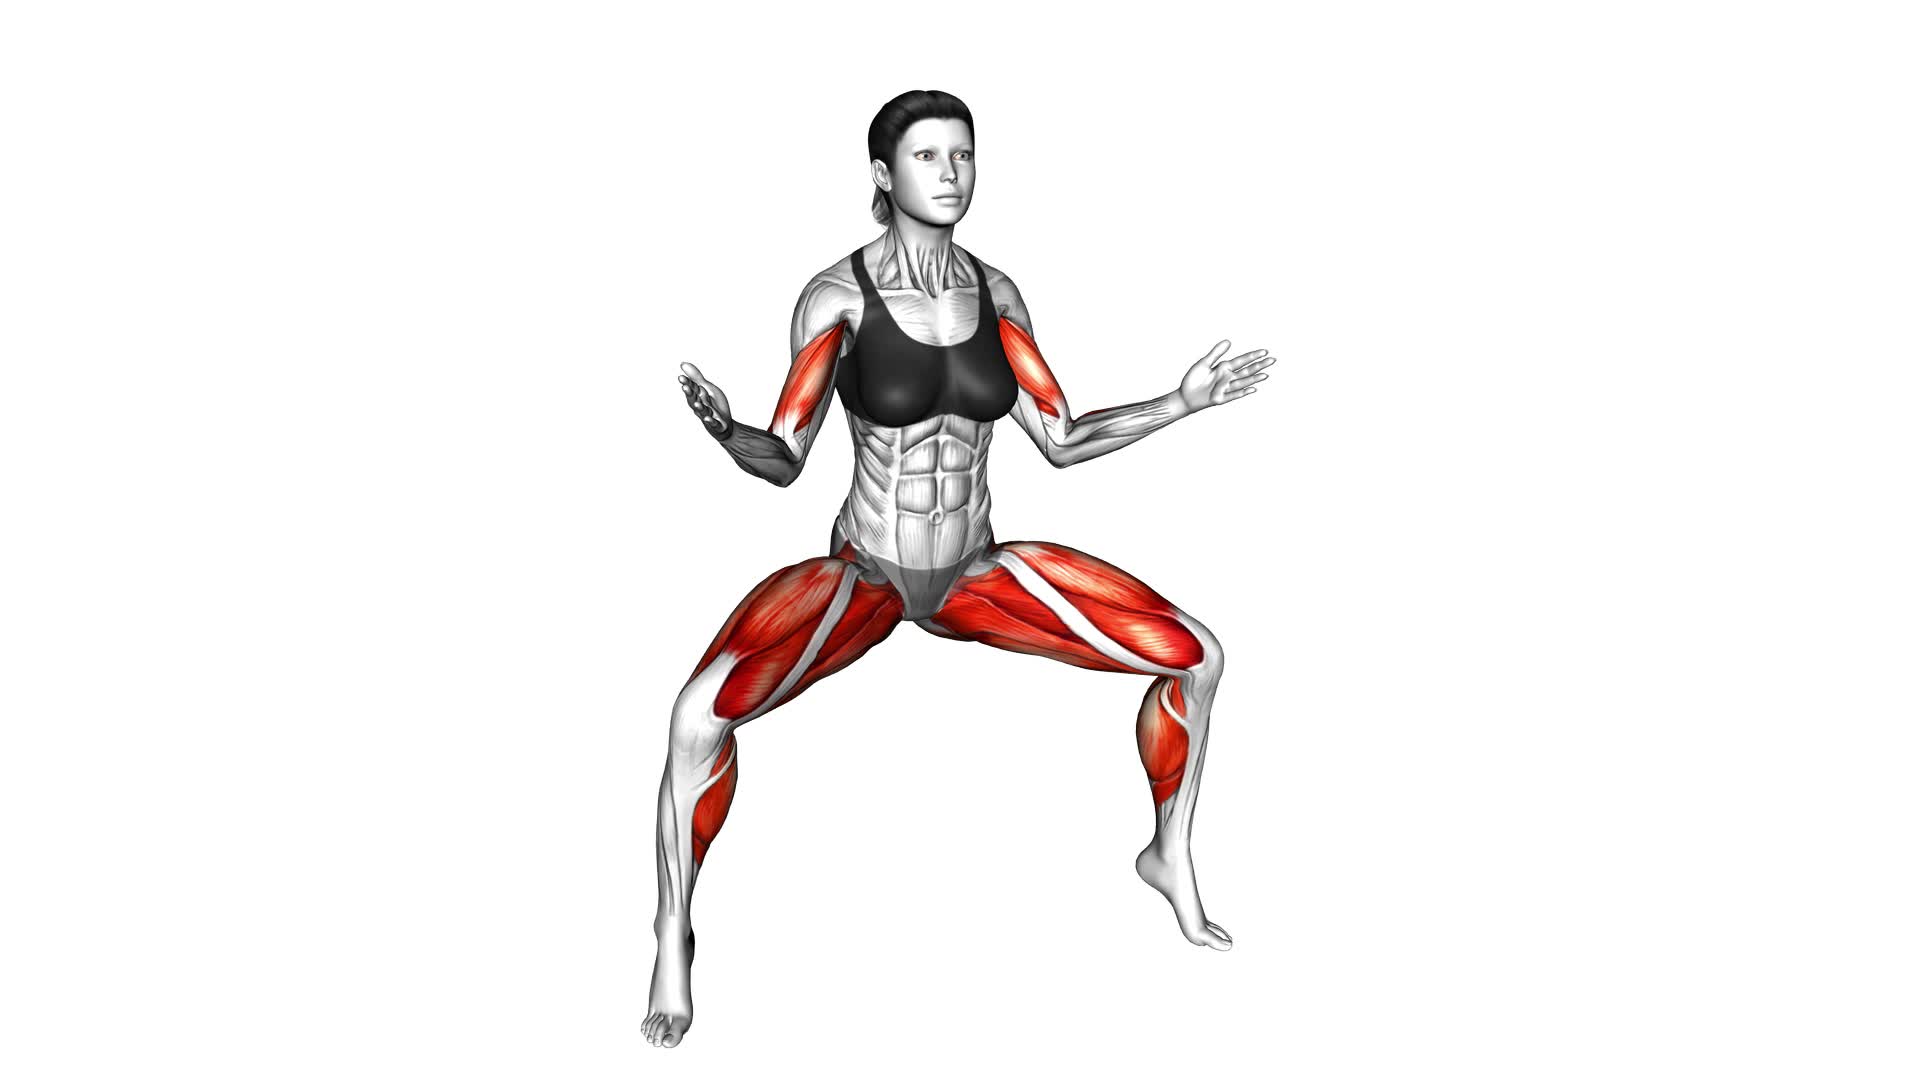 Sumo Quarter Squat Tip Toe With Arms Curl (Female) - Video Exercise Guide & Tips